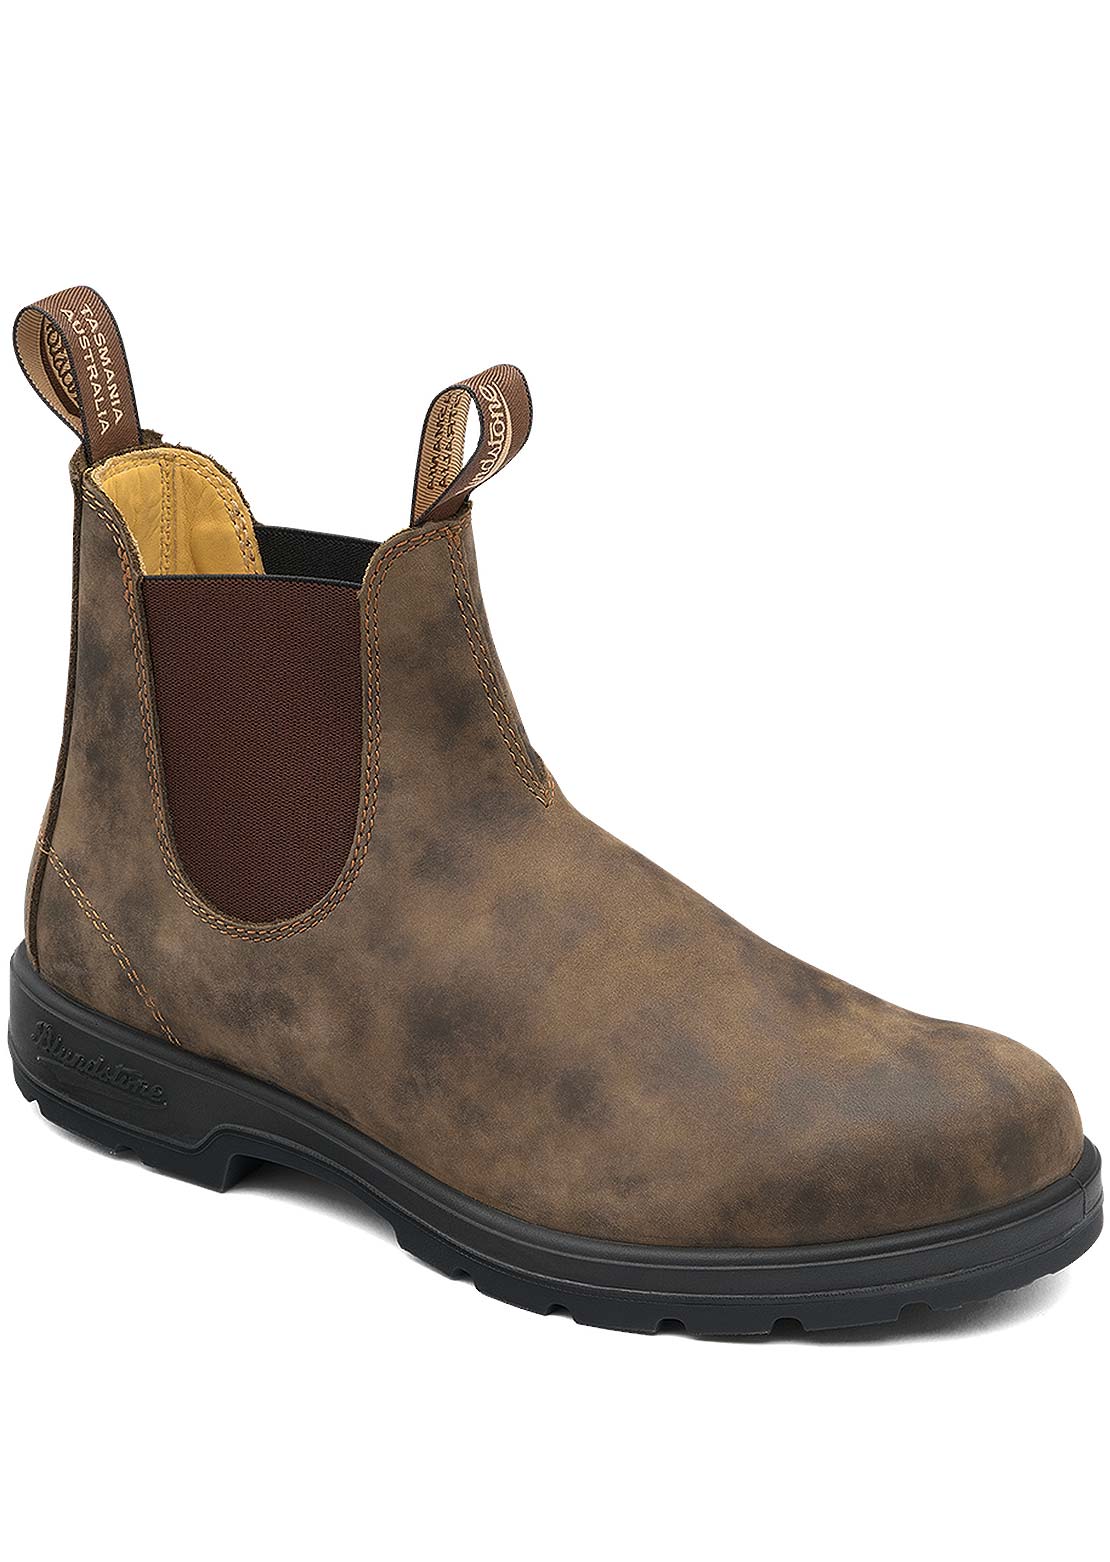 Blundstone 585 Classic Boots Rustic Brown